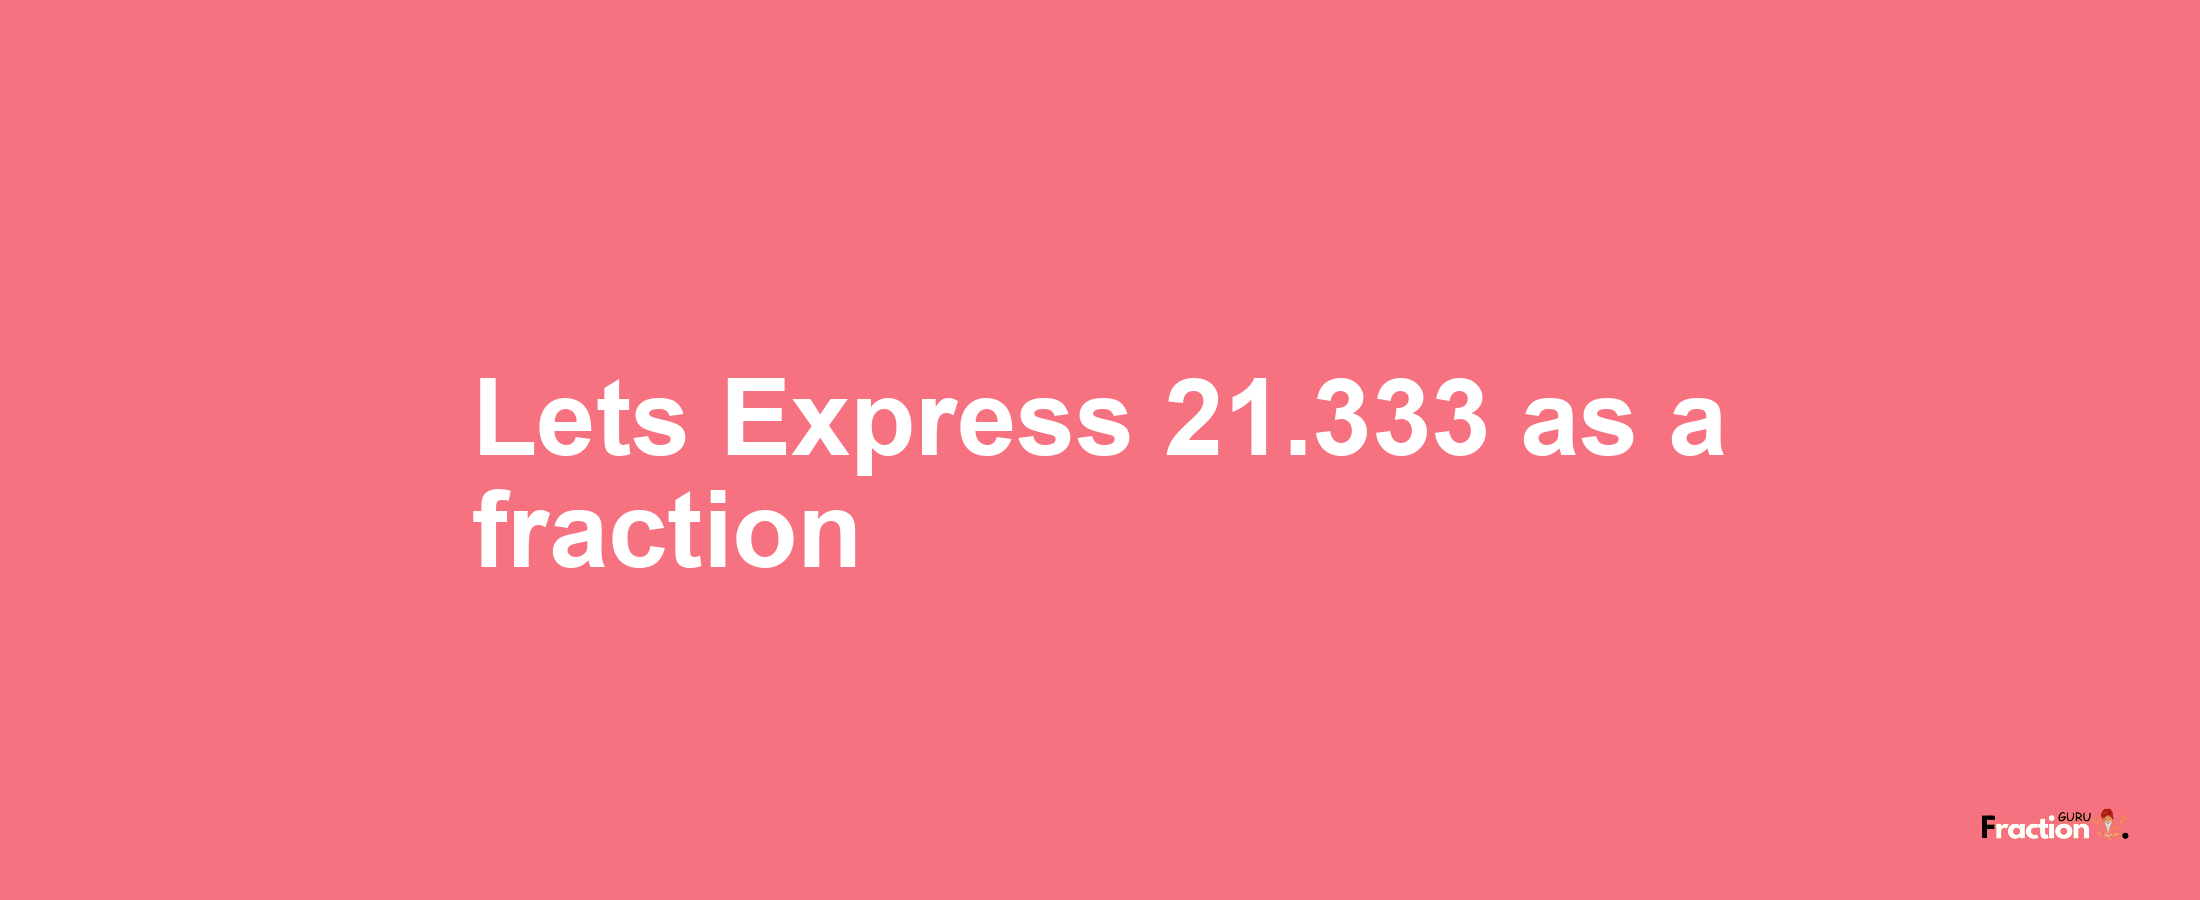 Lets Express 21.333 as afraction